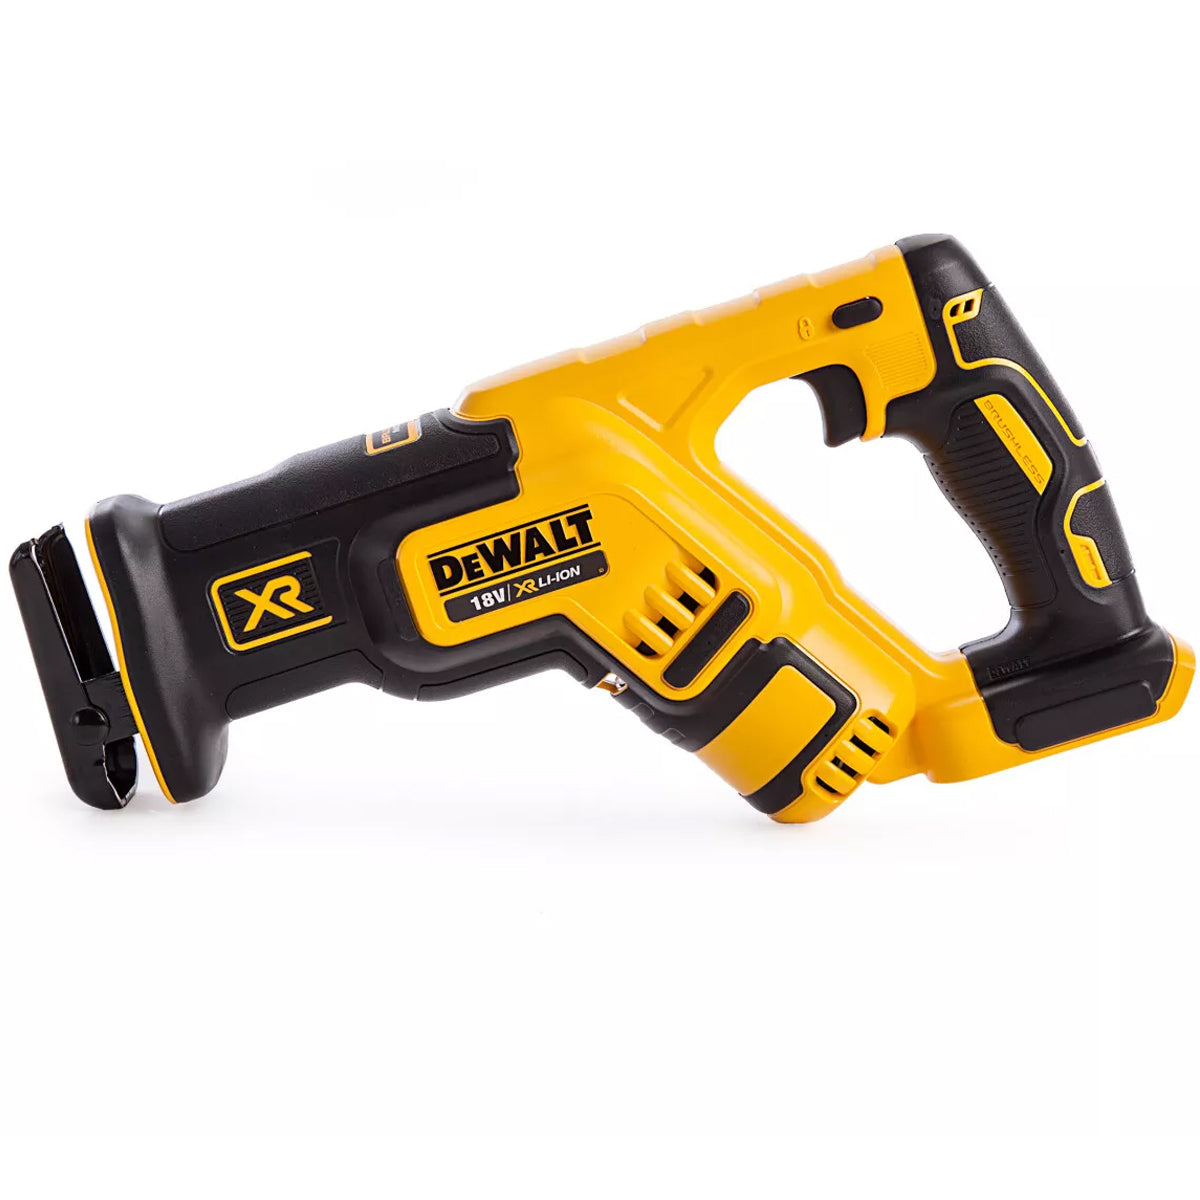 DeWalt DCS367N 18V Brushless Compact Reciprocating Saw Body Only